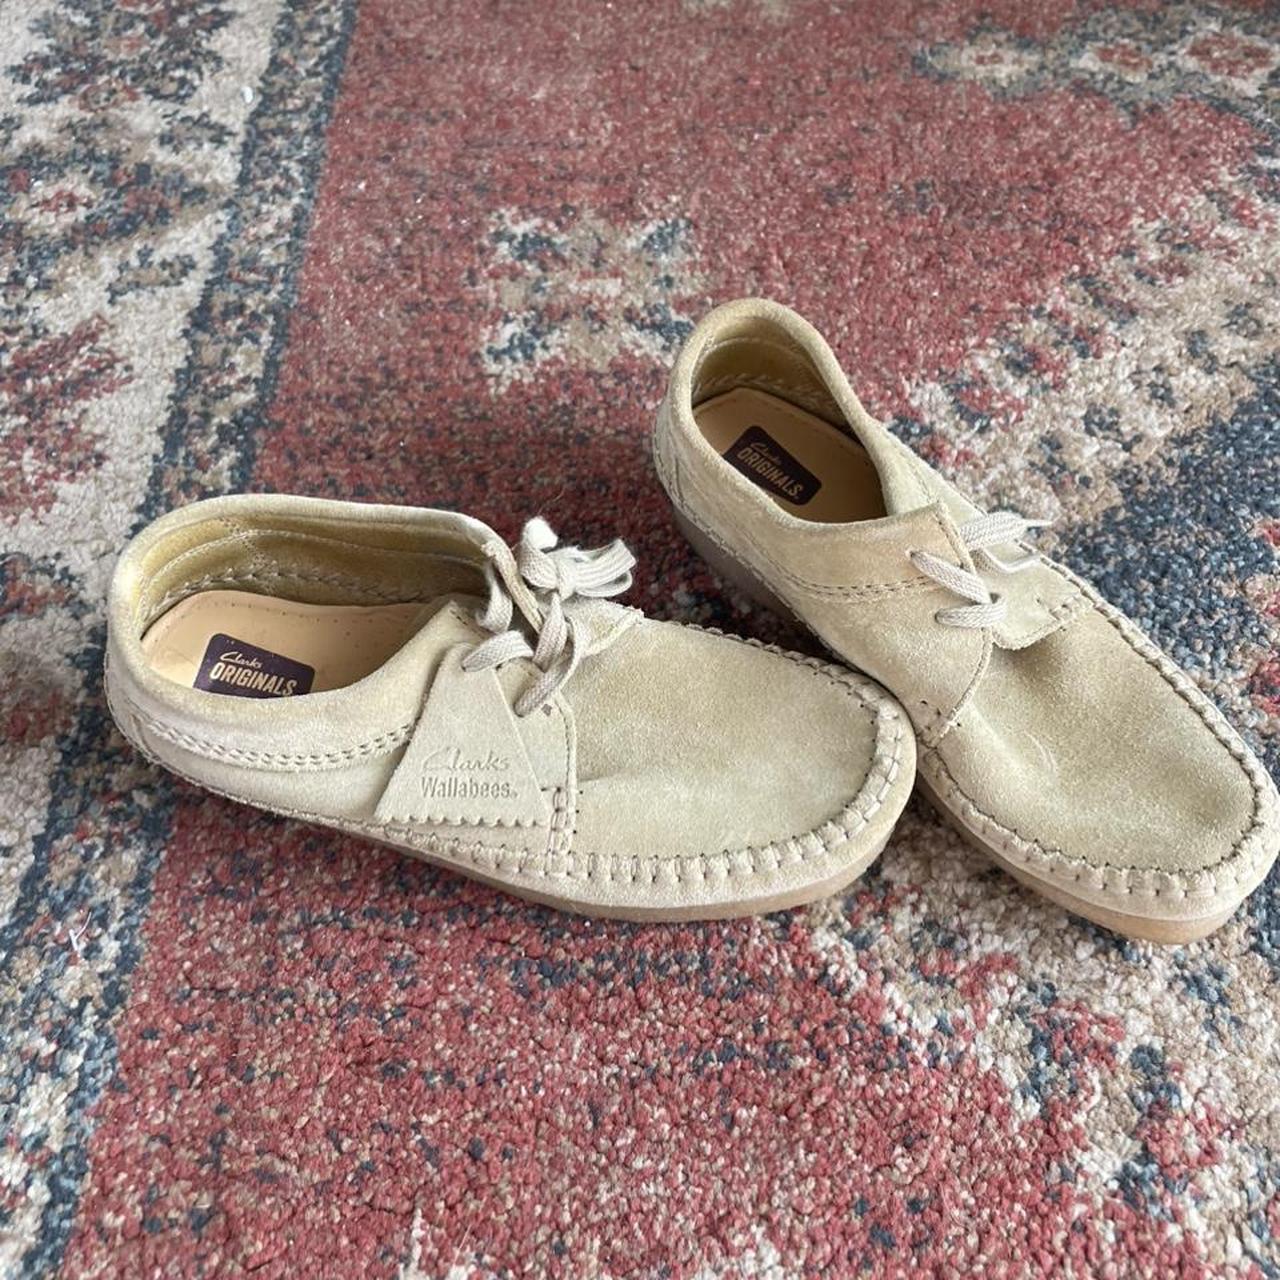 Product Image 2 - Clarks Wallabees Tan Moccasins -